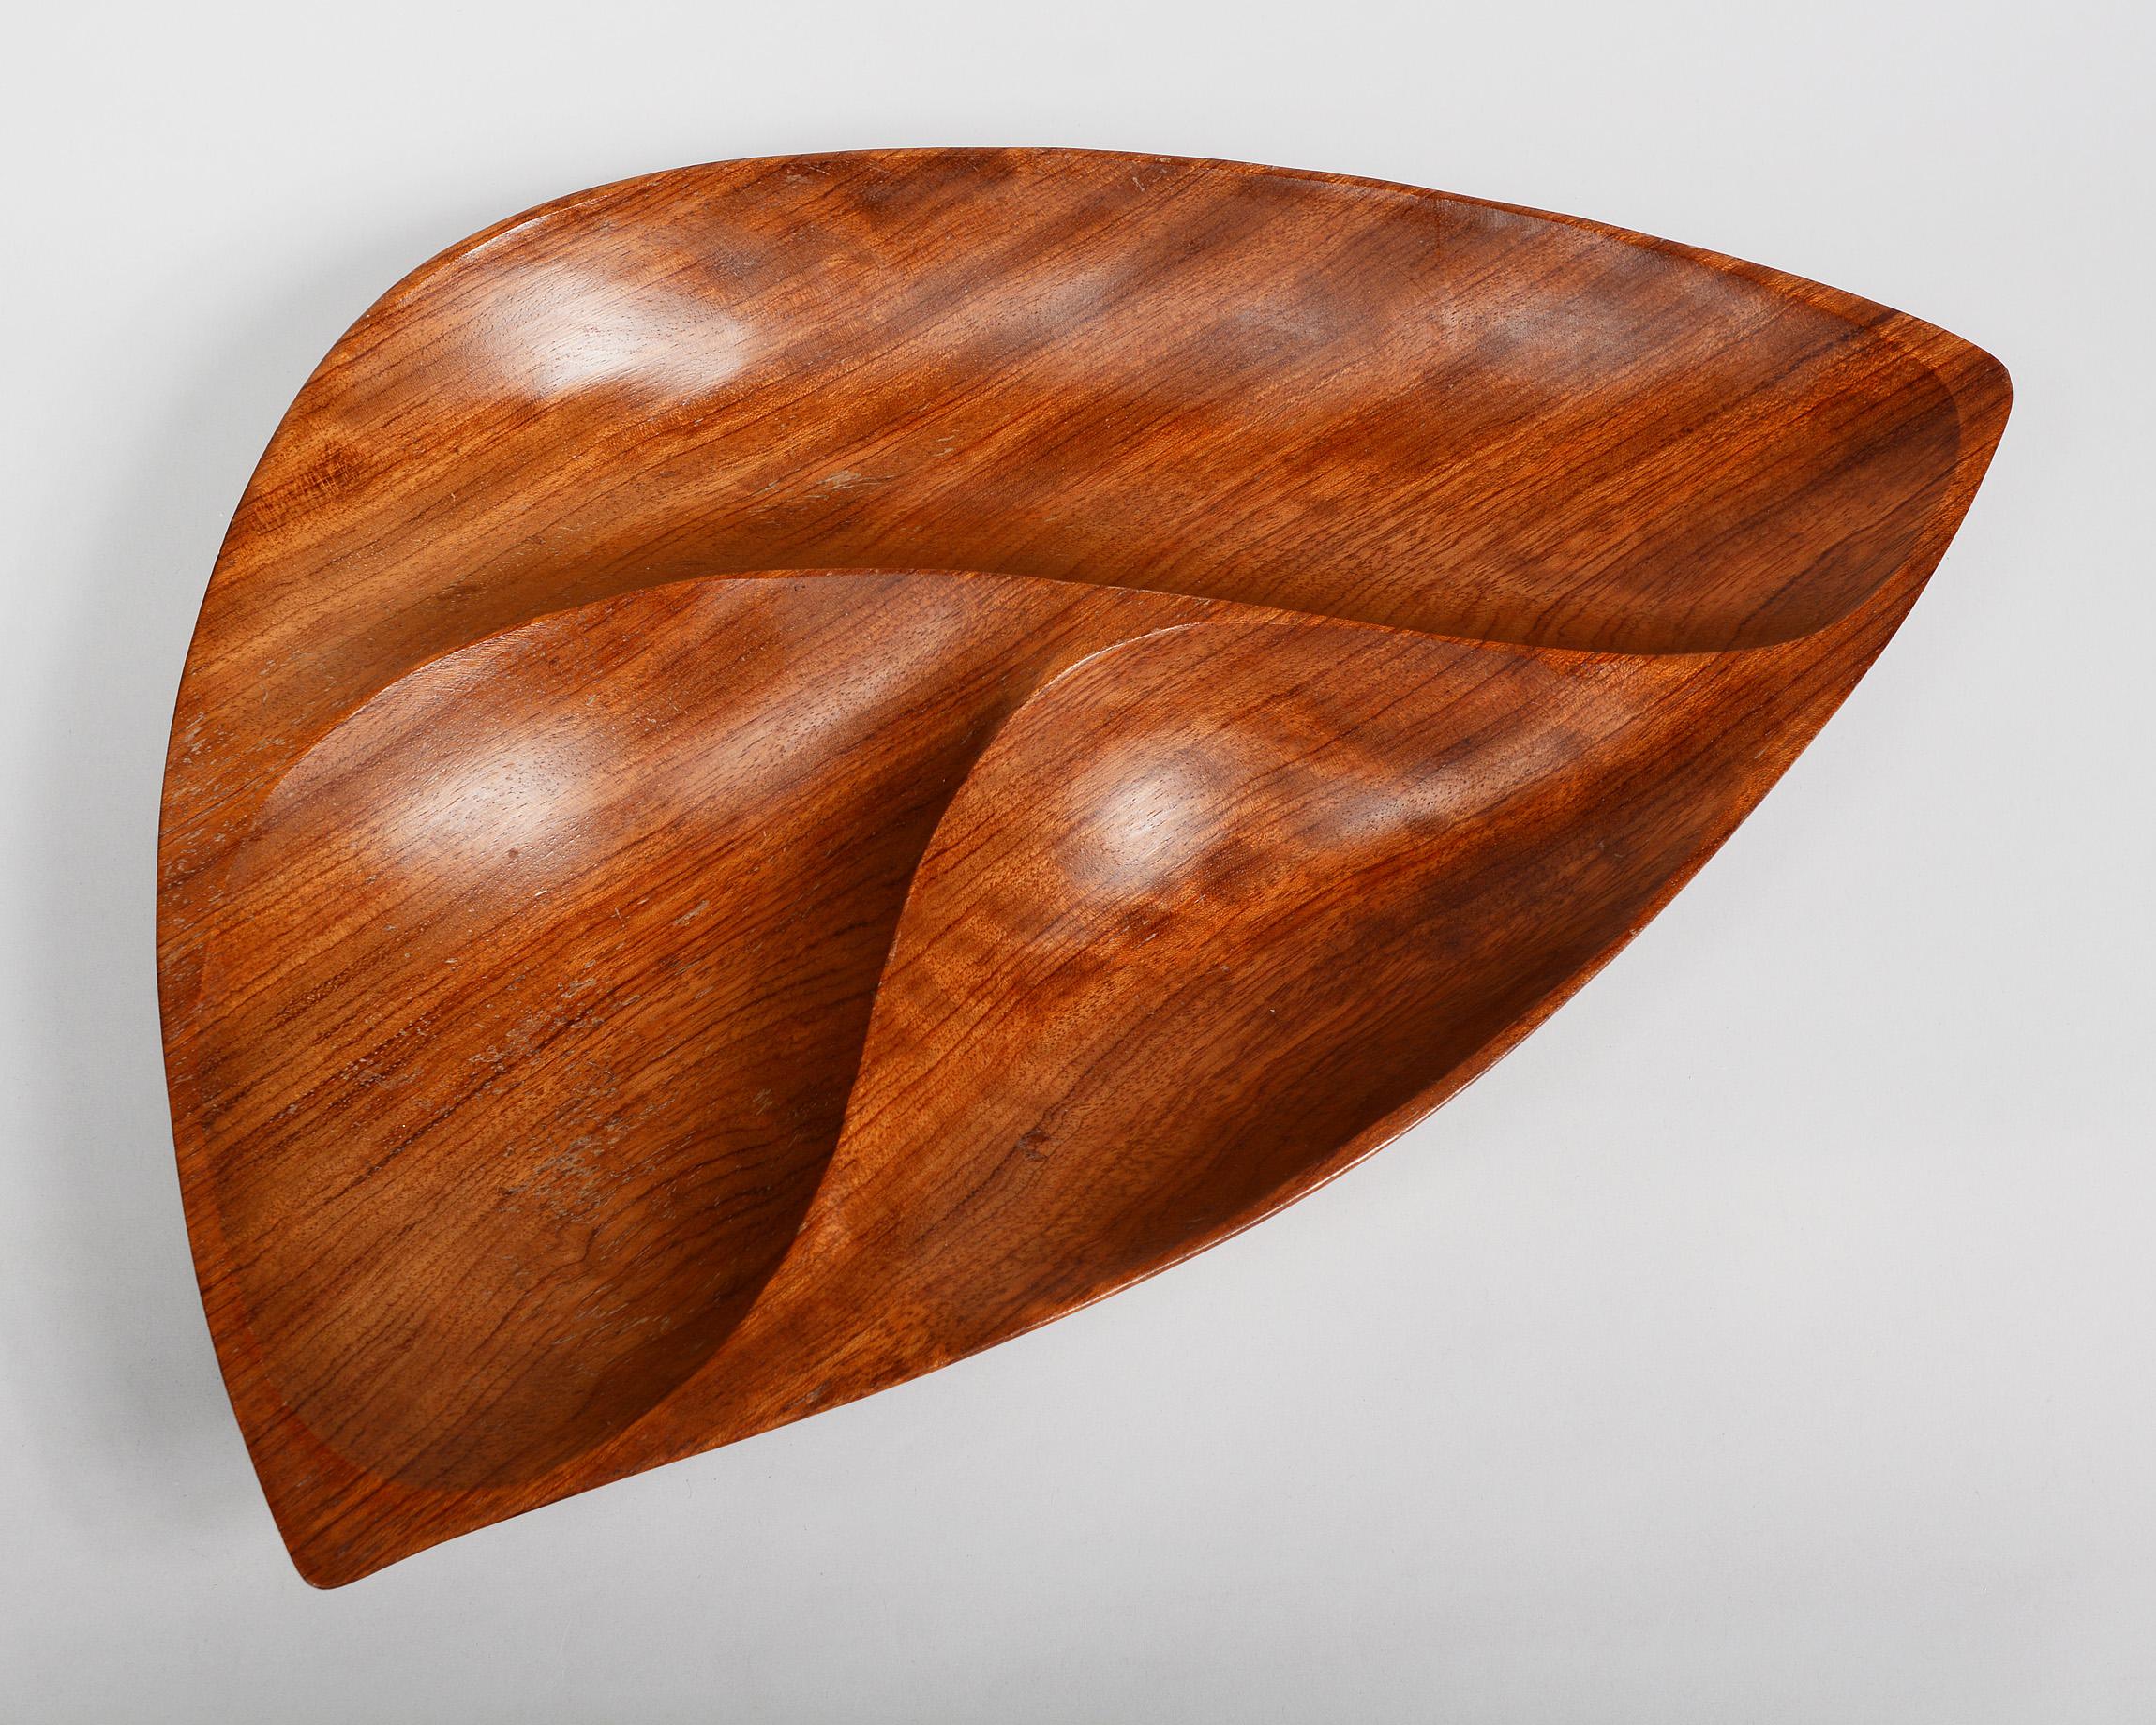 Three compartment bowl made by Emil Milan. This bowl is made from bubinga also known as African rosewood. The bowl rests on three sterling feet. There are some spots of lacquer losses.